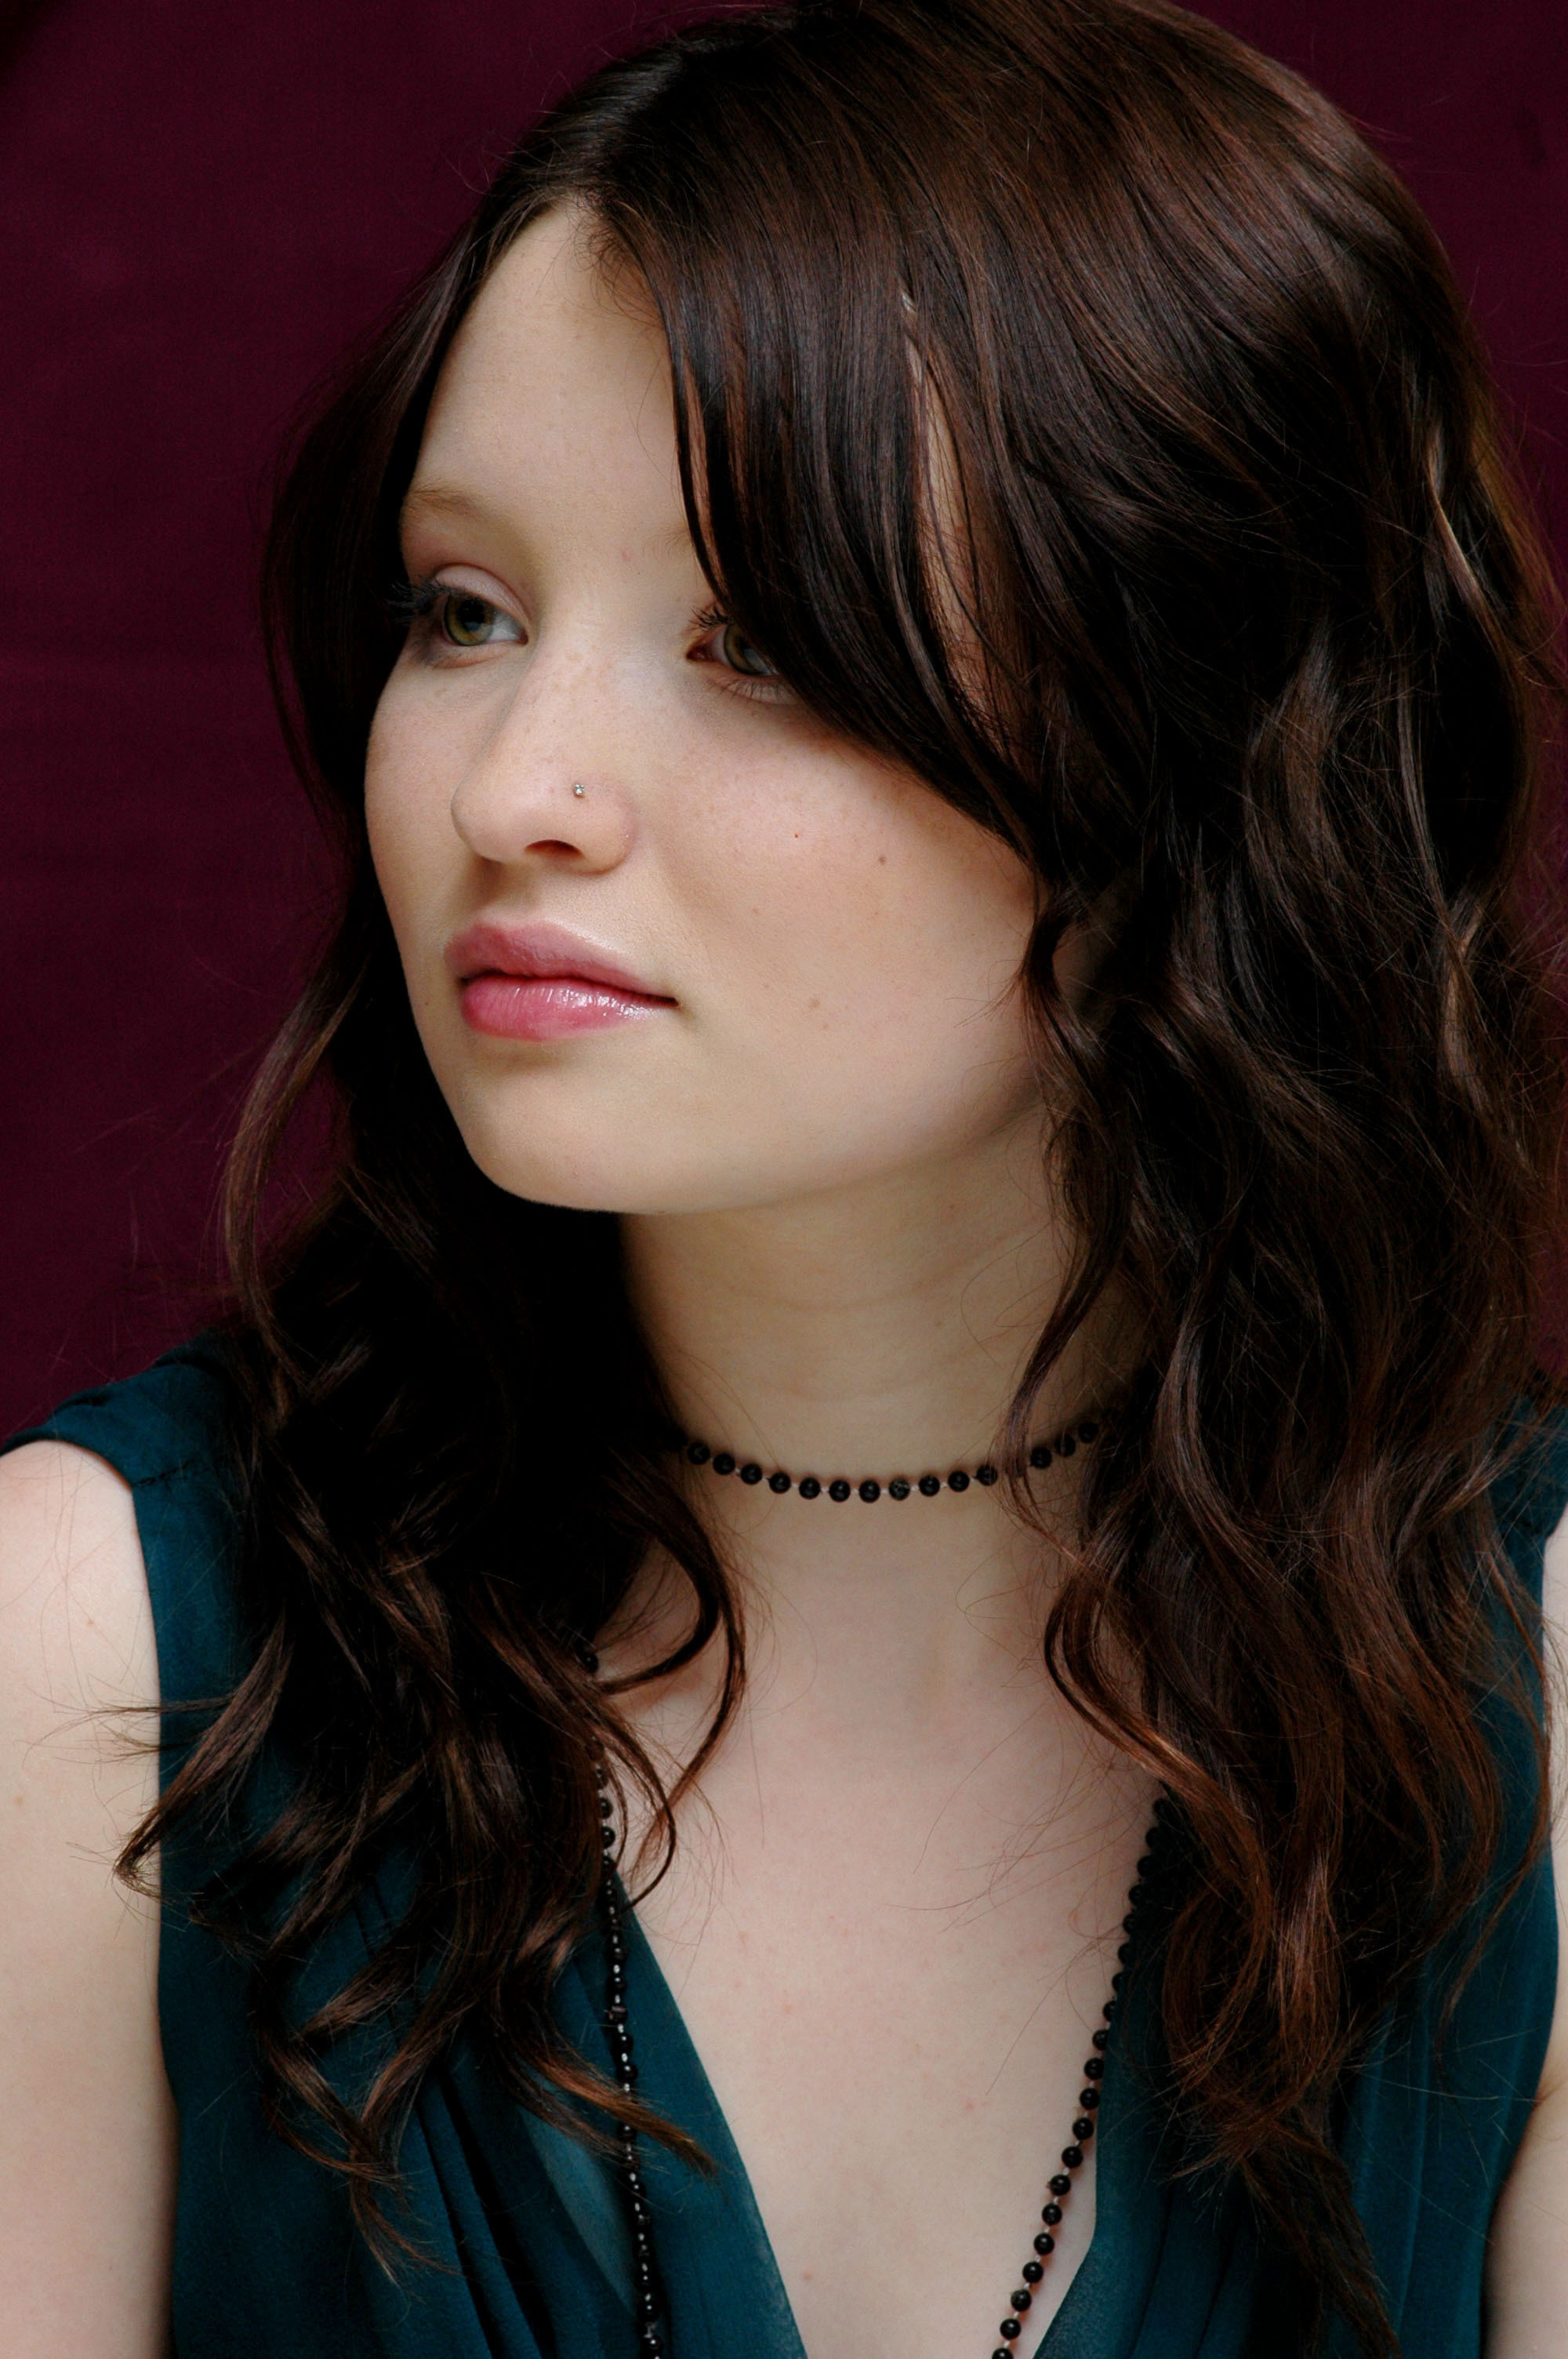 Emily Browning wallpapers, Mobile-friendly designs, Custom backgrounds, Vibrant visuals, 2000x3010 HD Handy